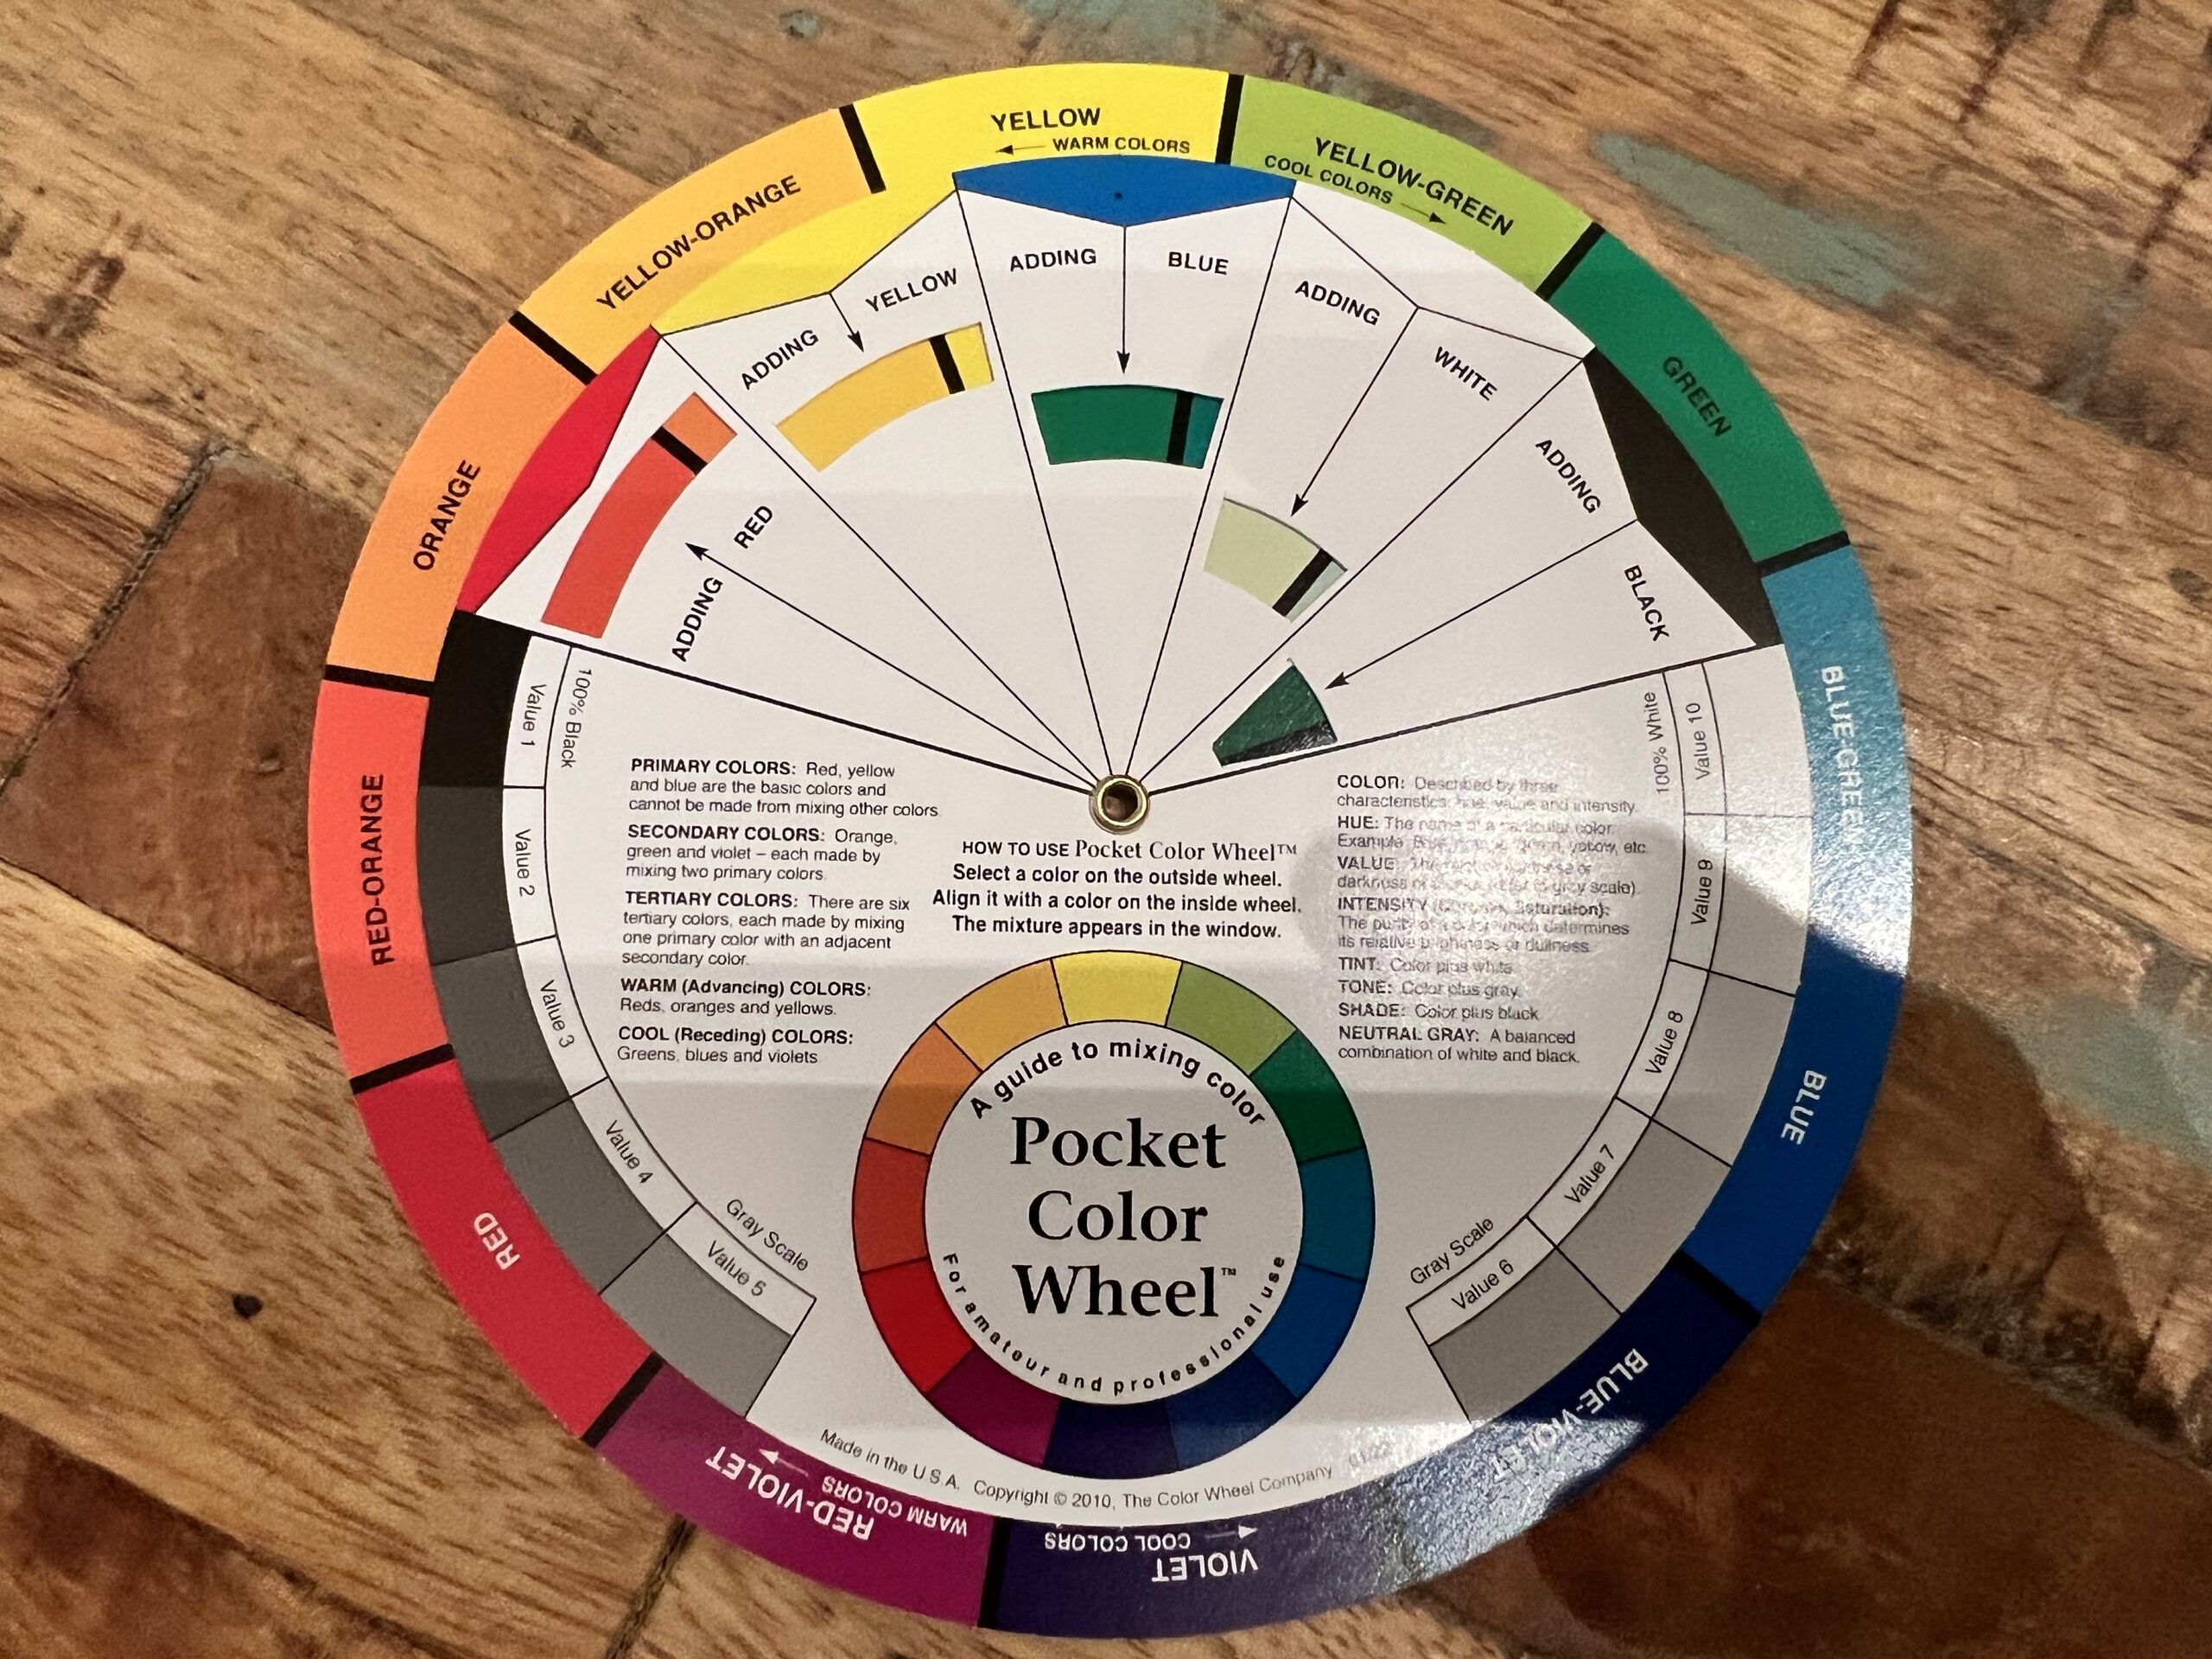 The Pocket Color Wheel does a good job of explaining hair color theory by highlighting certain colors with detailed descriptions.